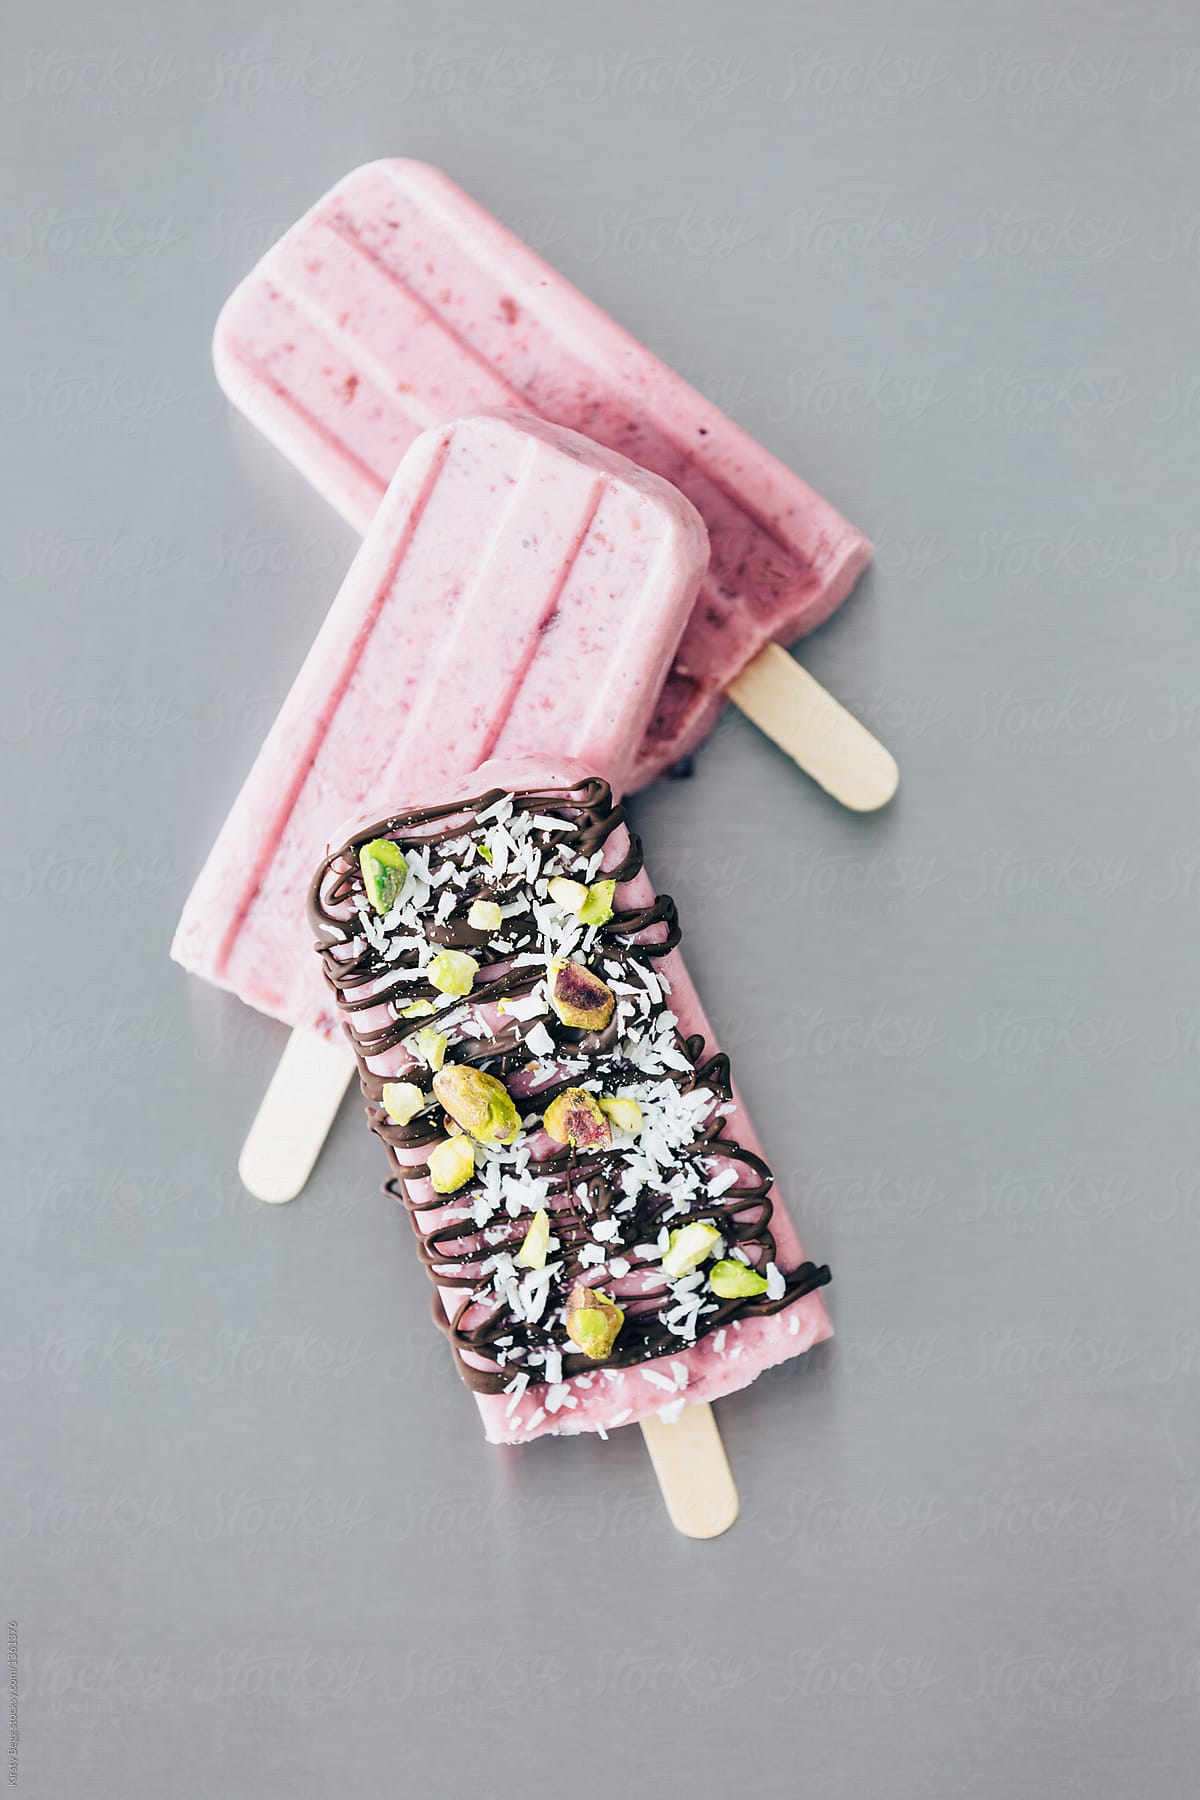 Decorated cherry ice popsicle lolly with chocolate and coconut